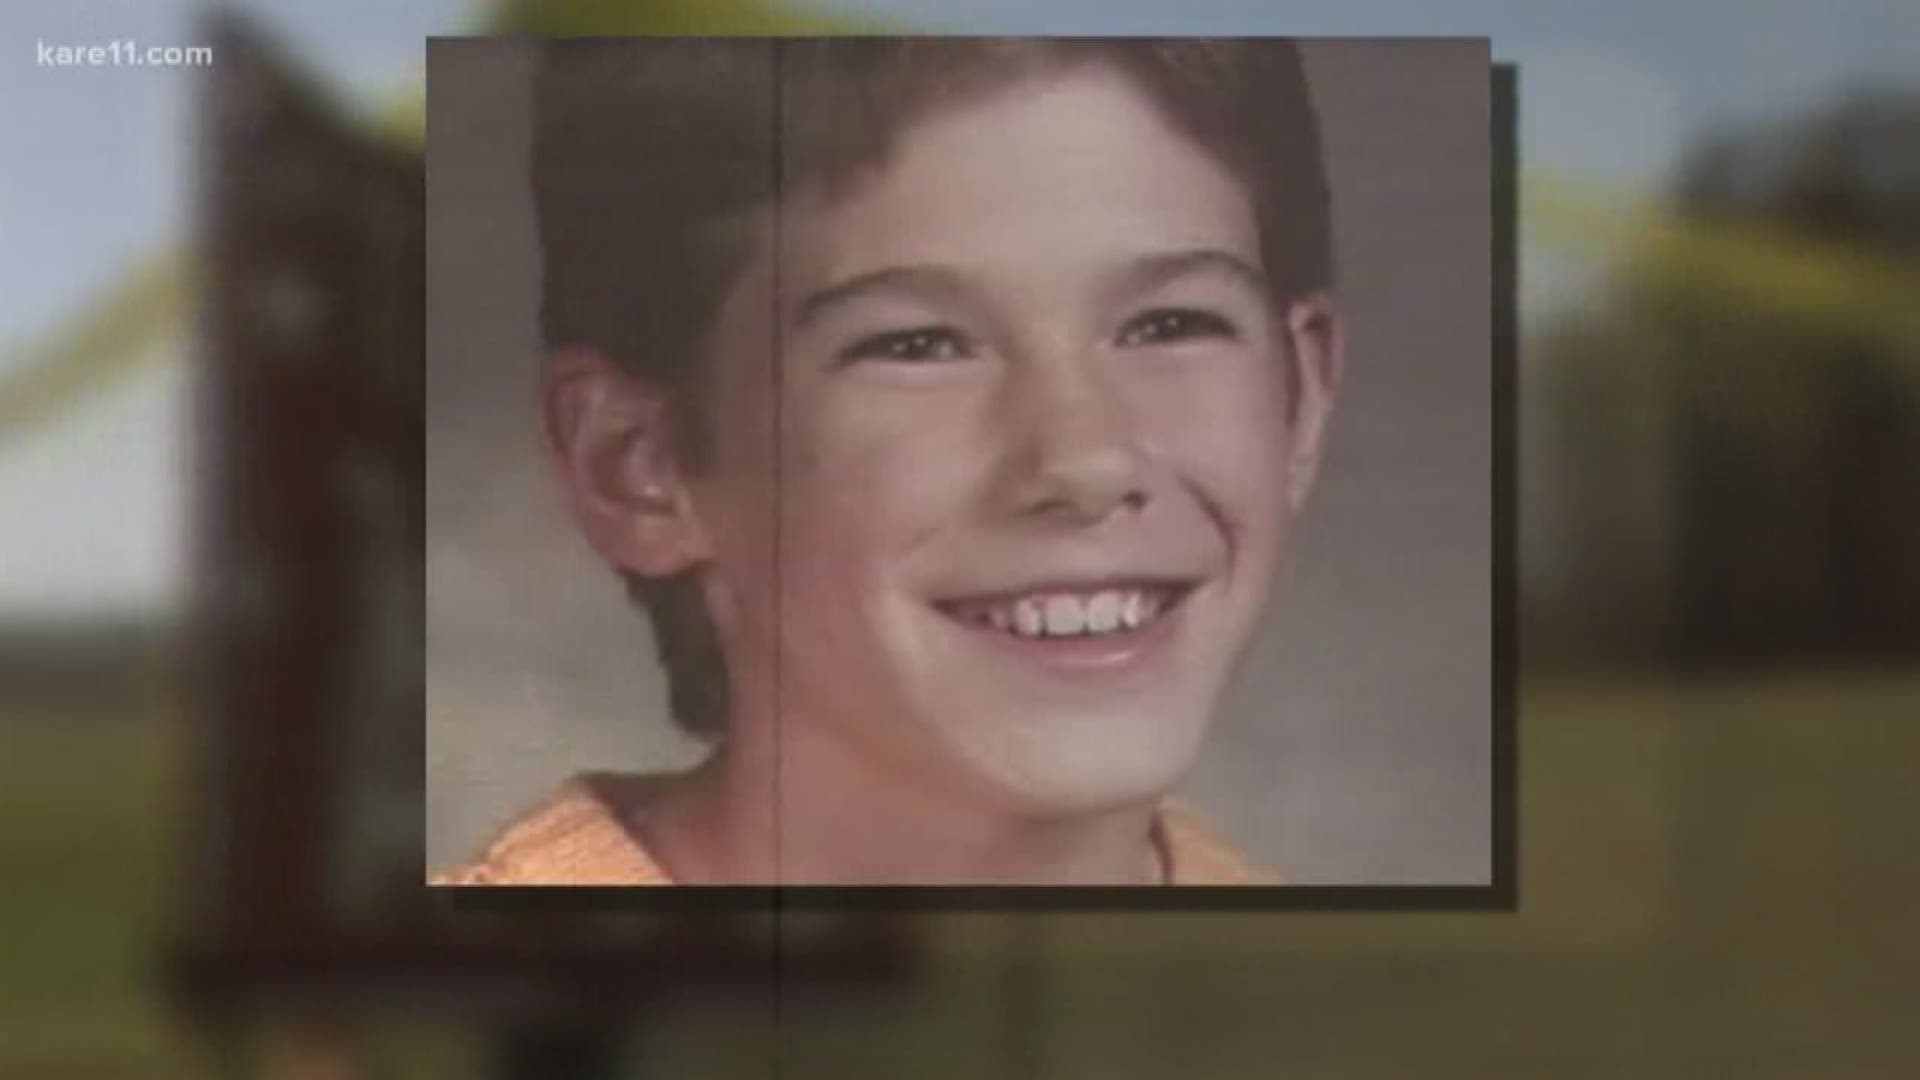 The family of Jacob Wetterling is bracing for the release of more than 41,000 pages of case records from the investigation of his kidnapping and murder.